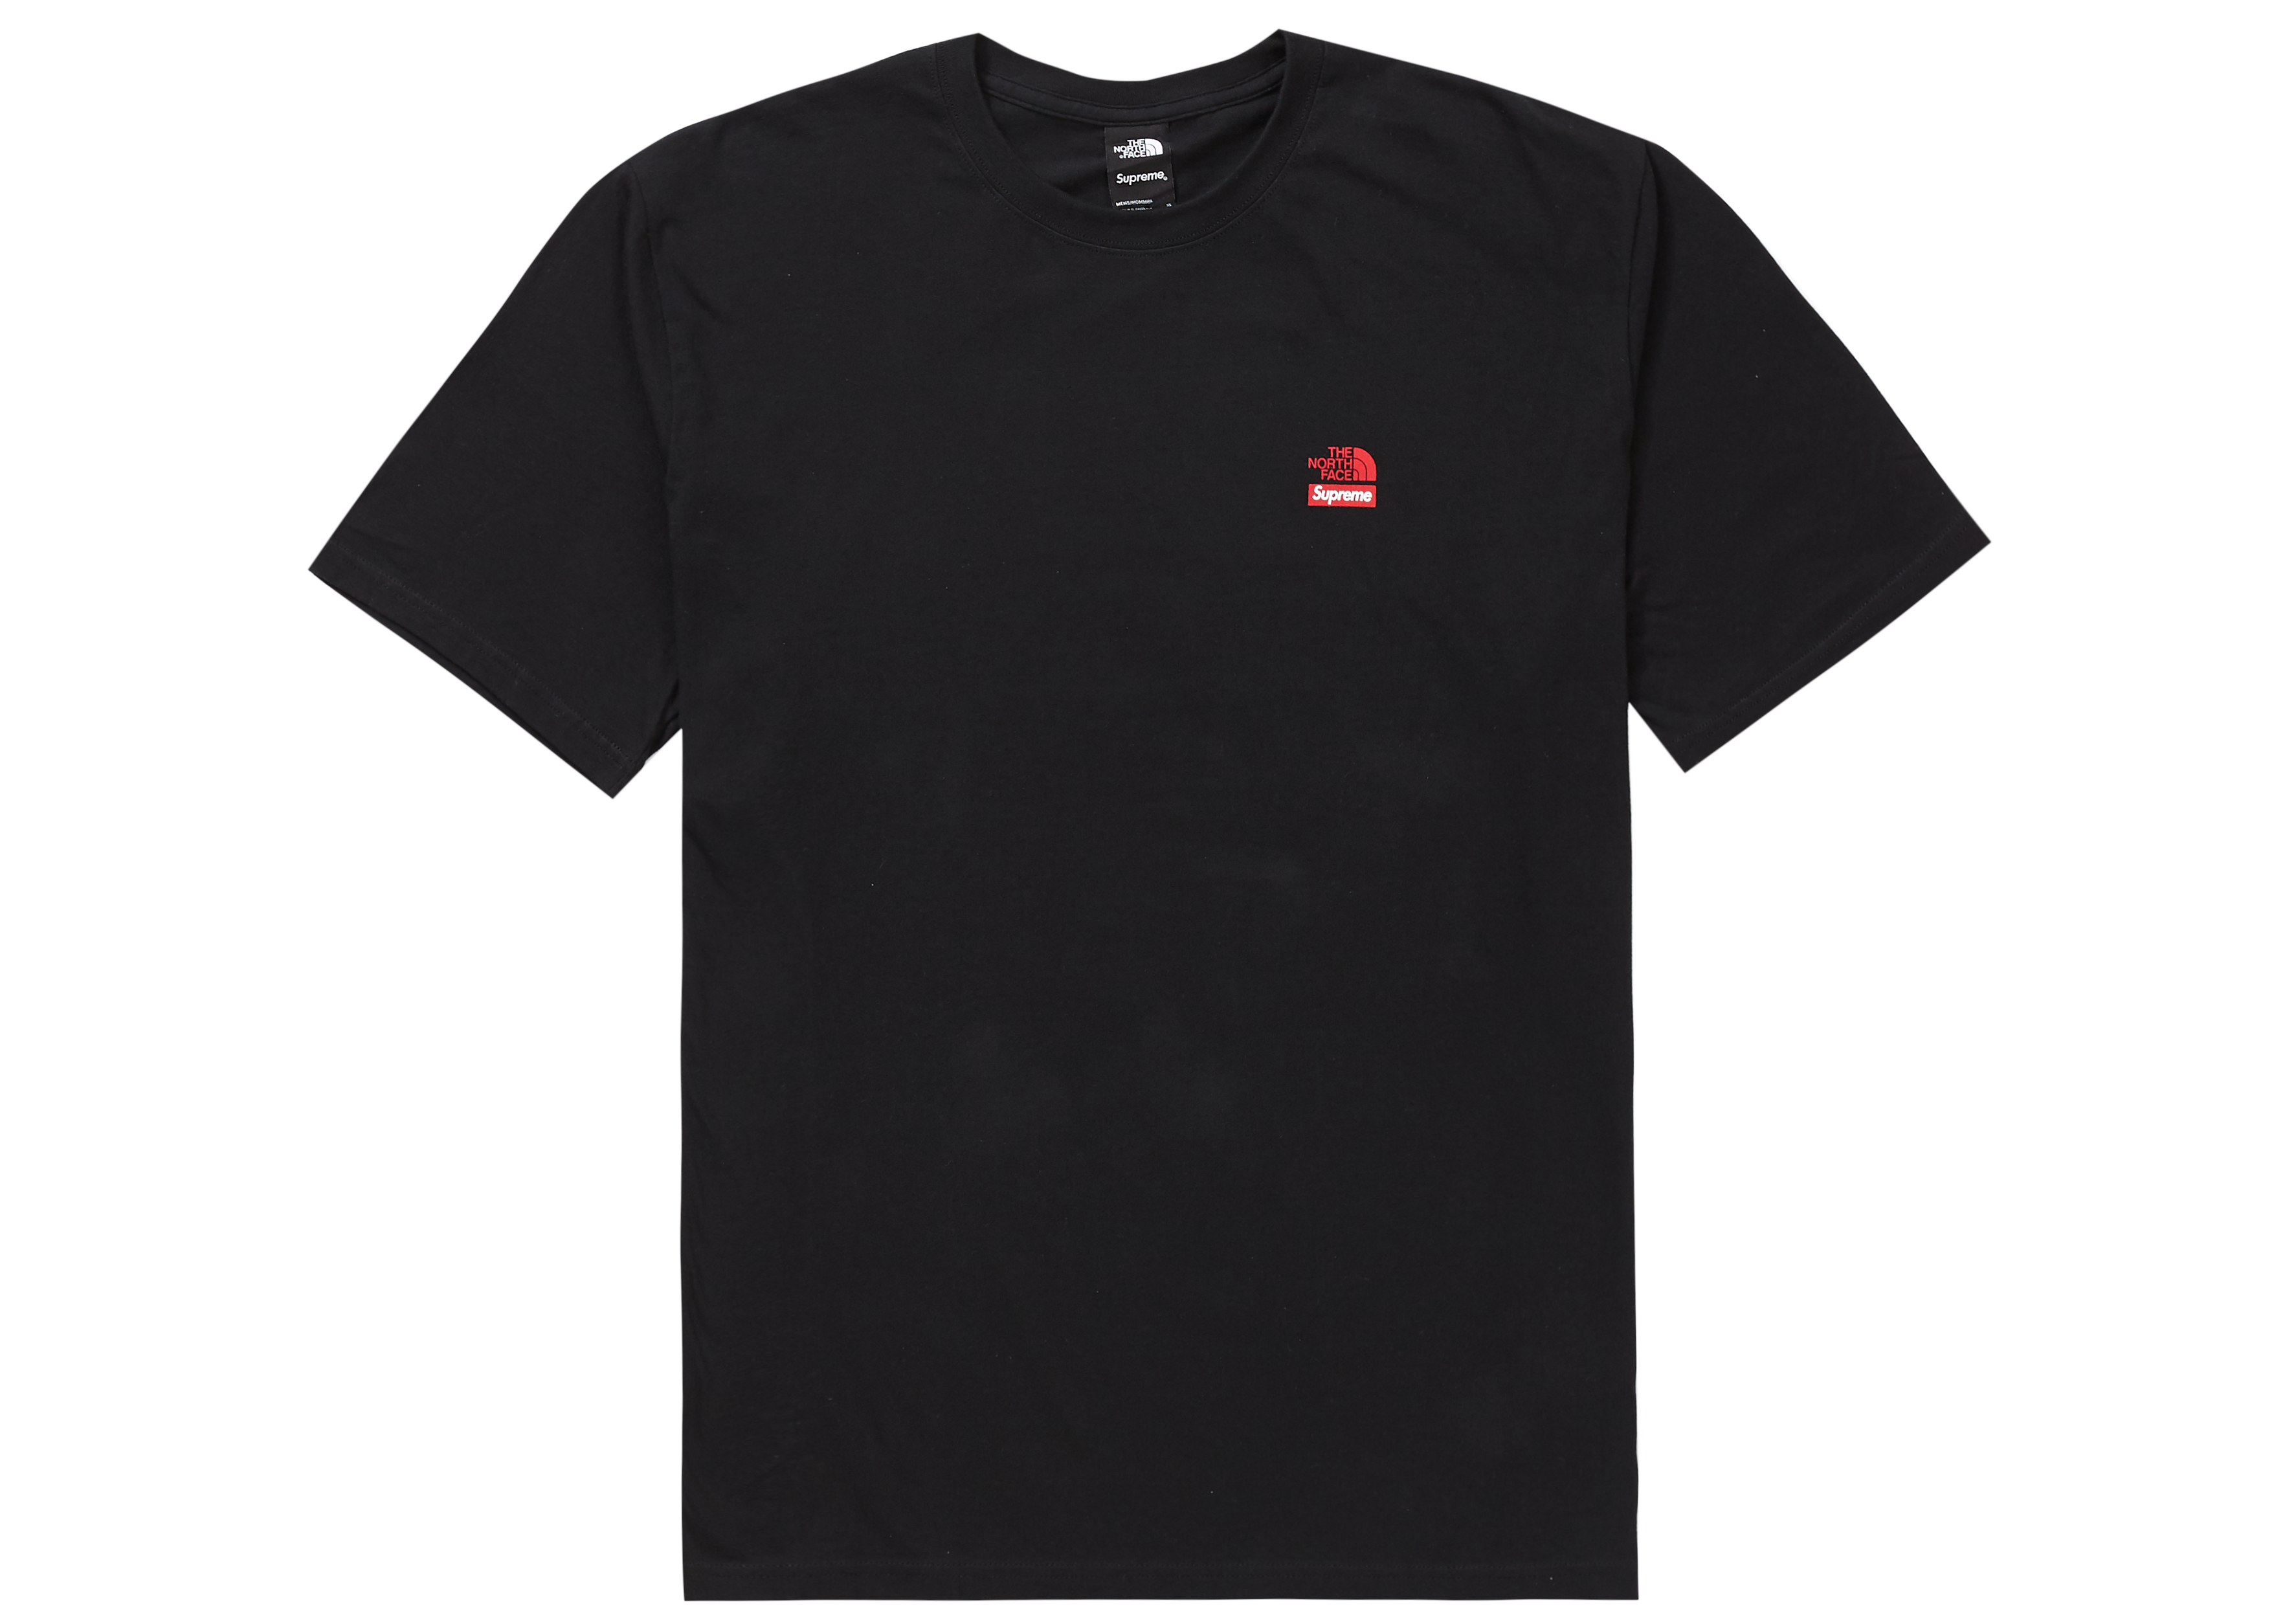 Supreme The North Face Statue of Liberty Tee Black Men's - FW19